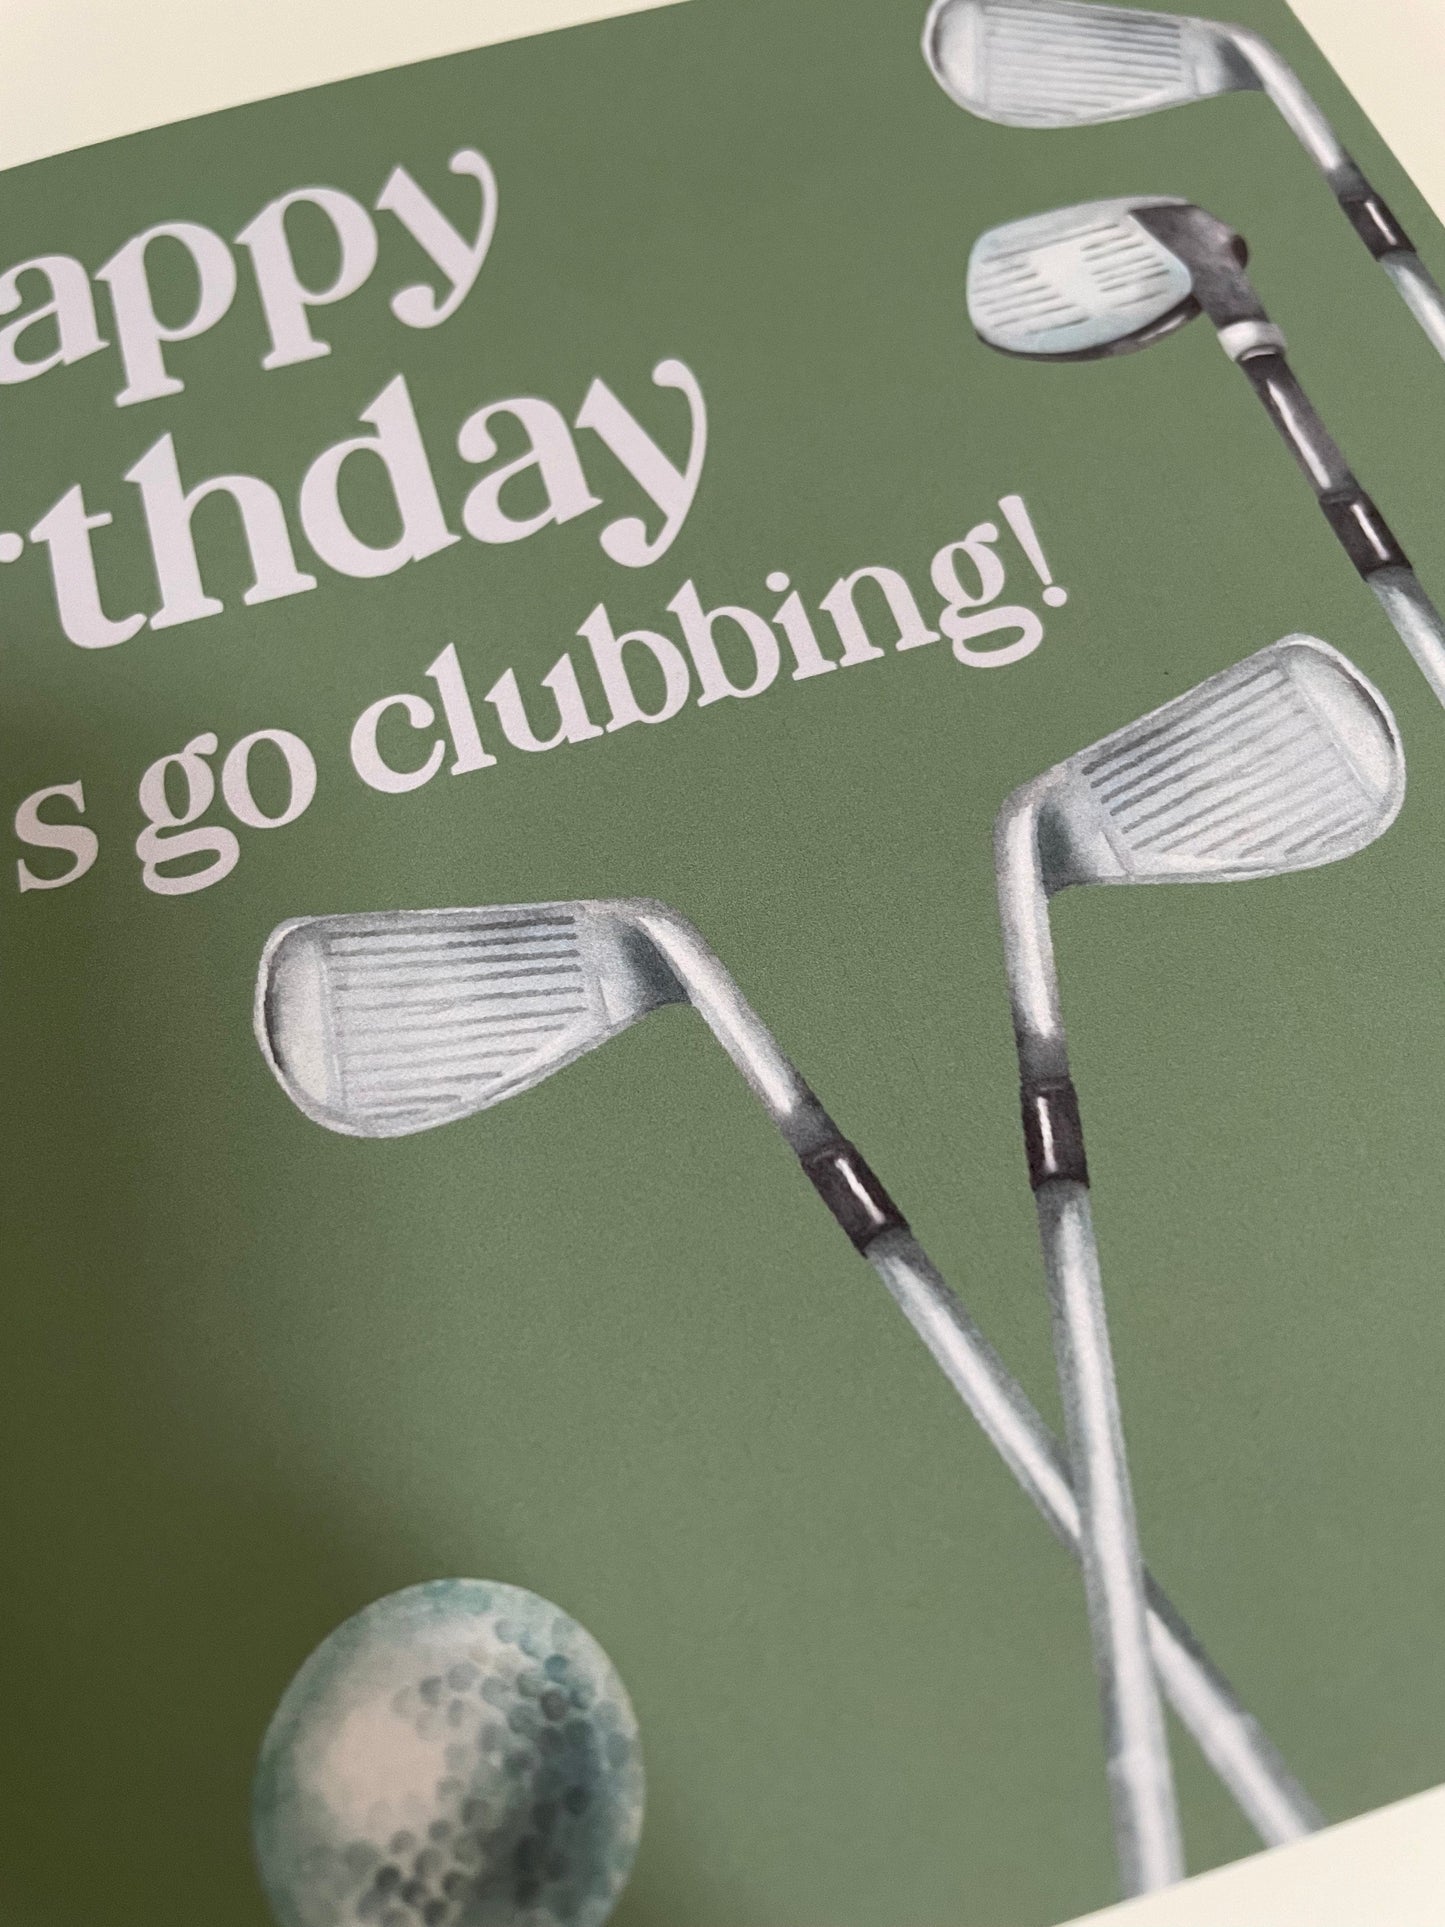 And Hope Designs Cards Golf clubbing birthday card